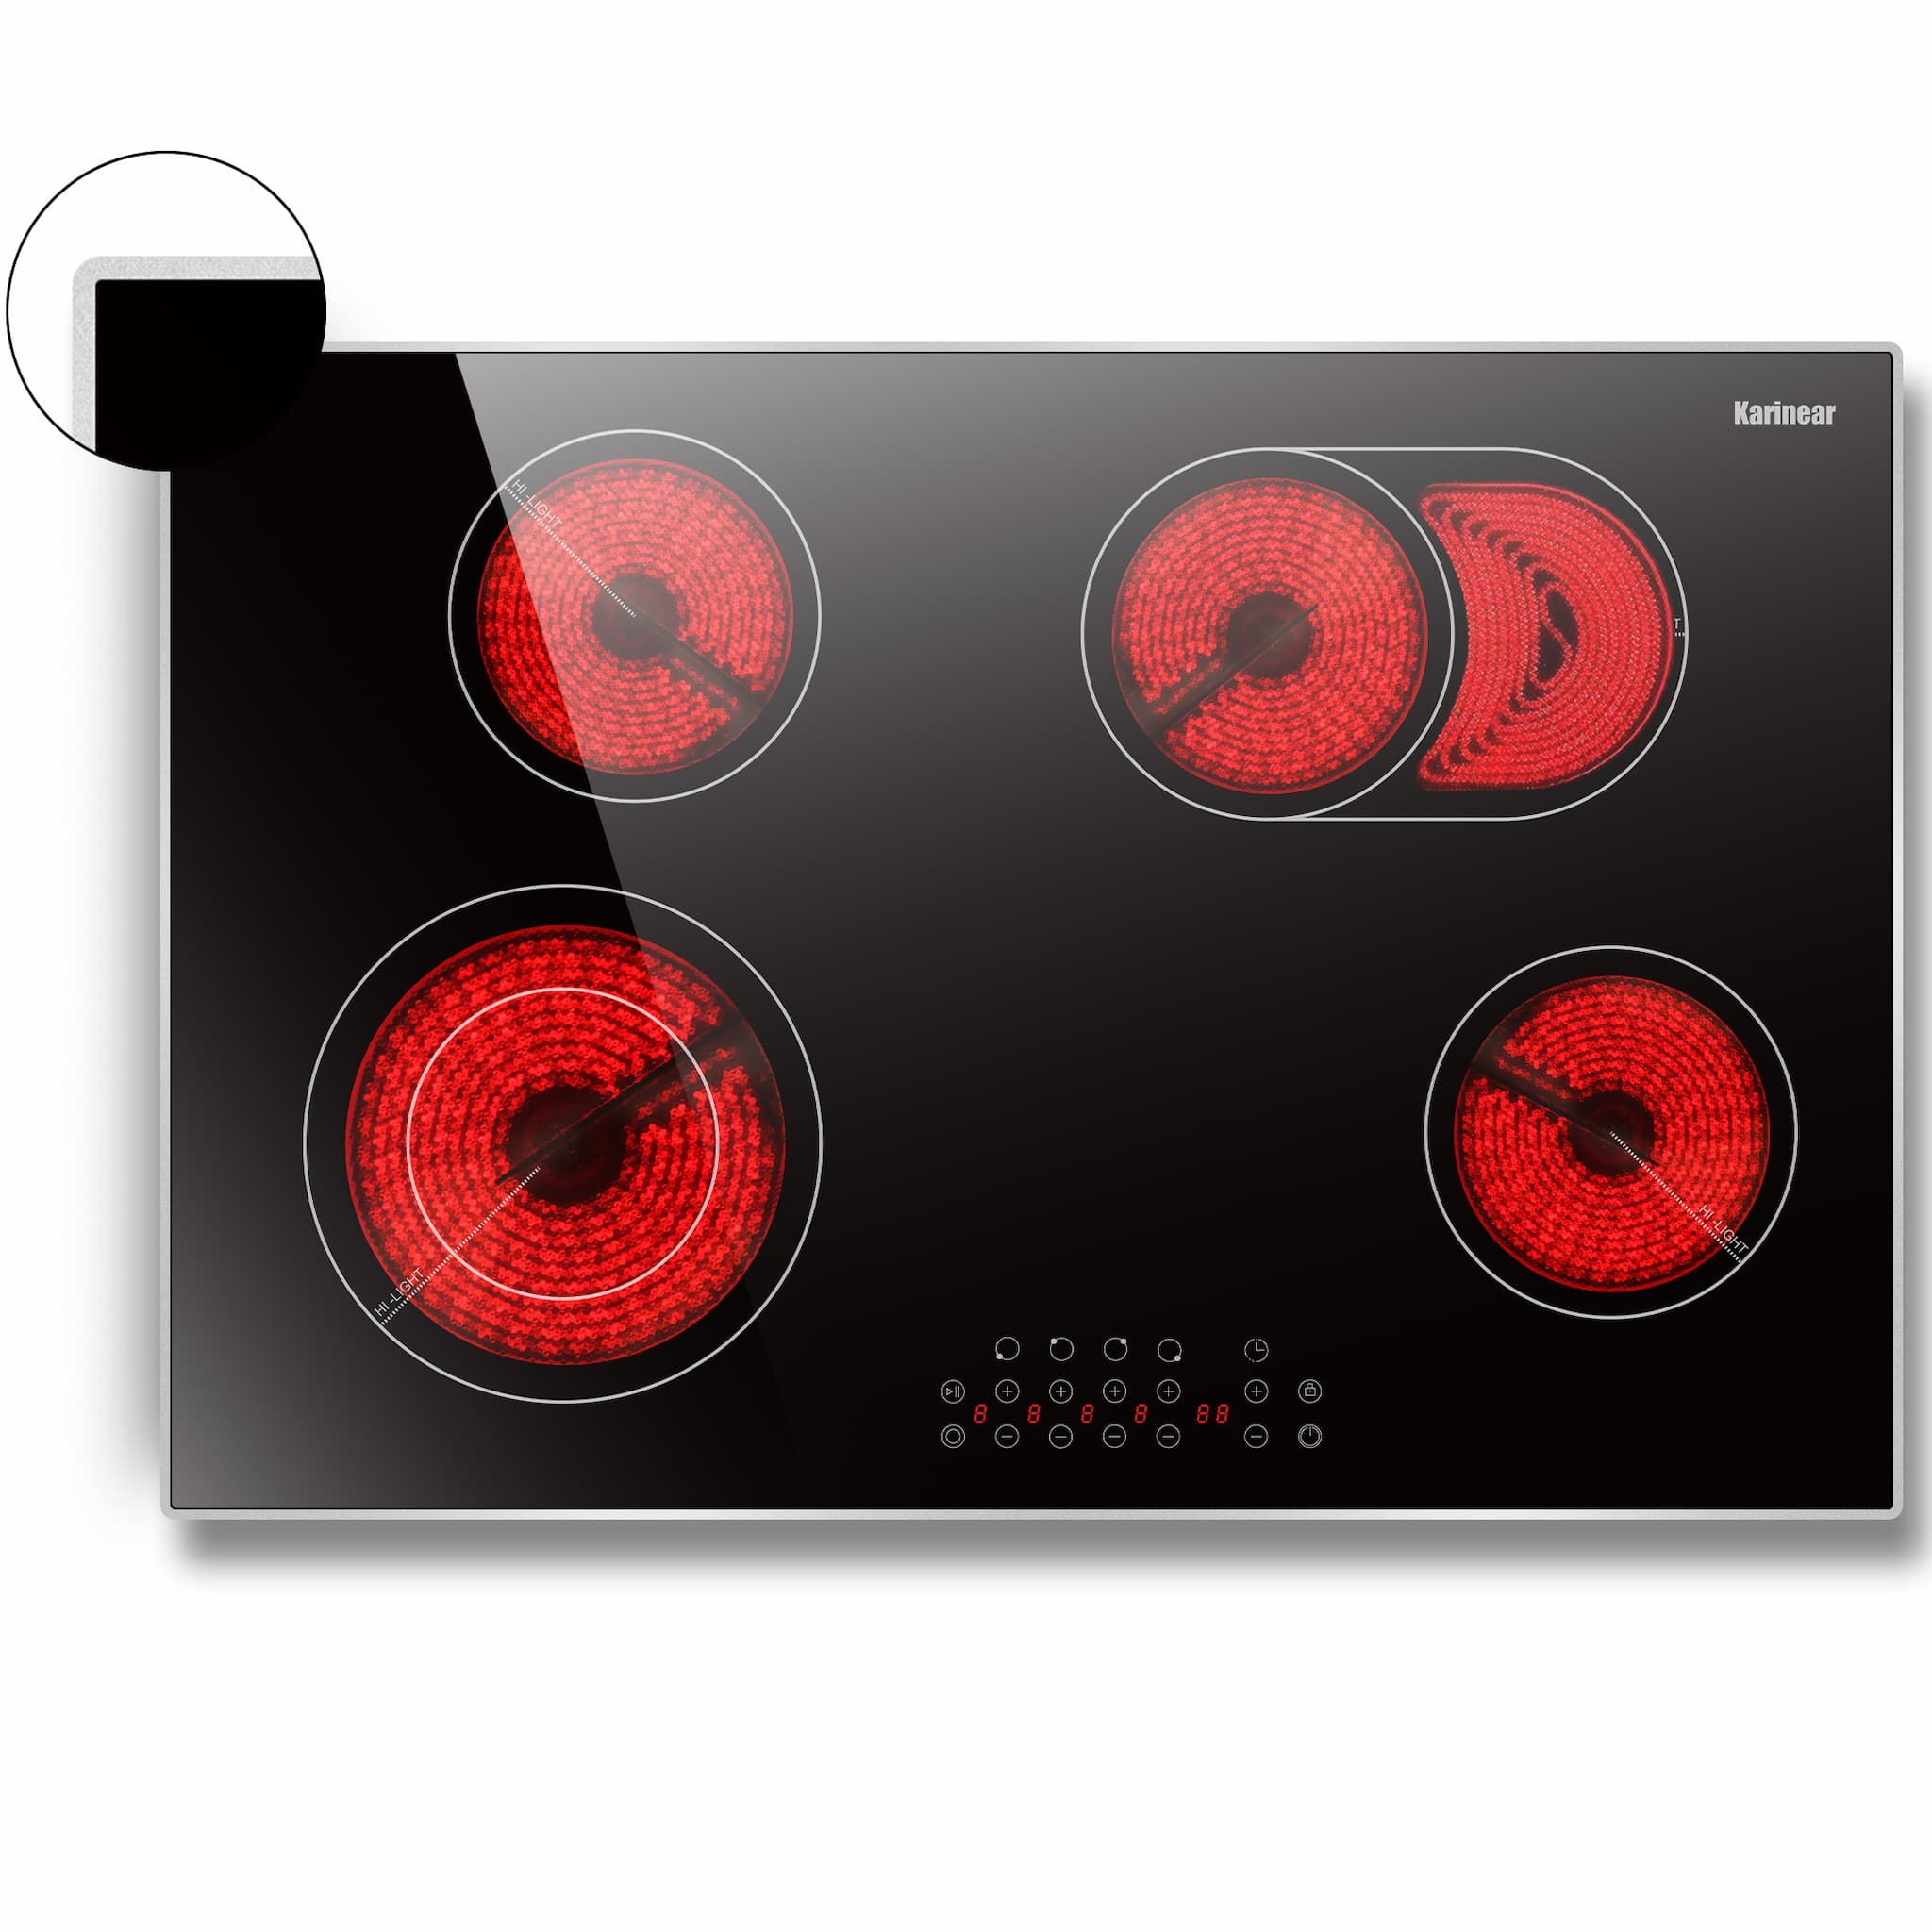 Karinear 30 Inch Electric Cooktop 4 Burners, Built-in Electric Stove top with Glass Protection Metal Frame, Expandable Burners, Multi-function Electric Ceramic Cooktop, 220-240v Hard Wire, No Plug